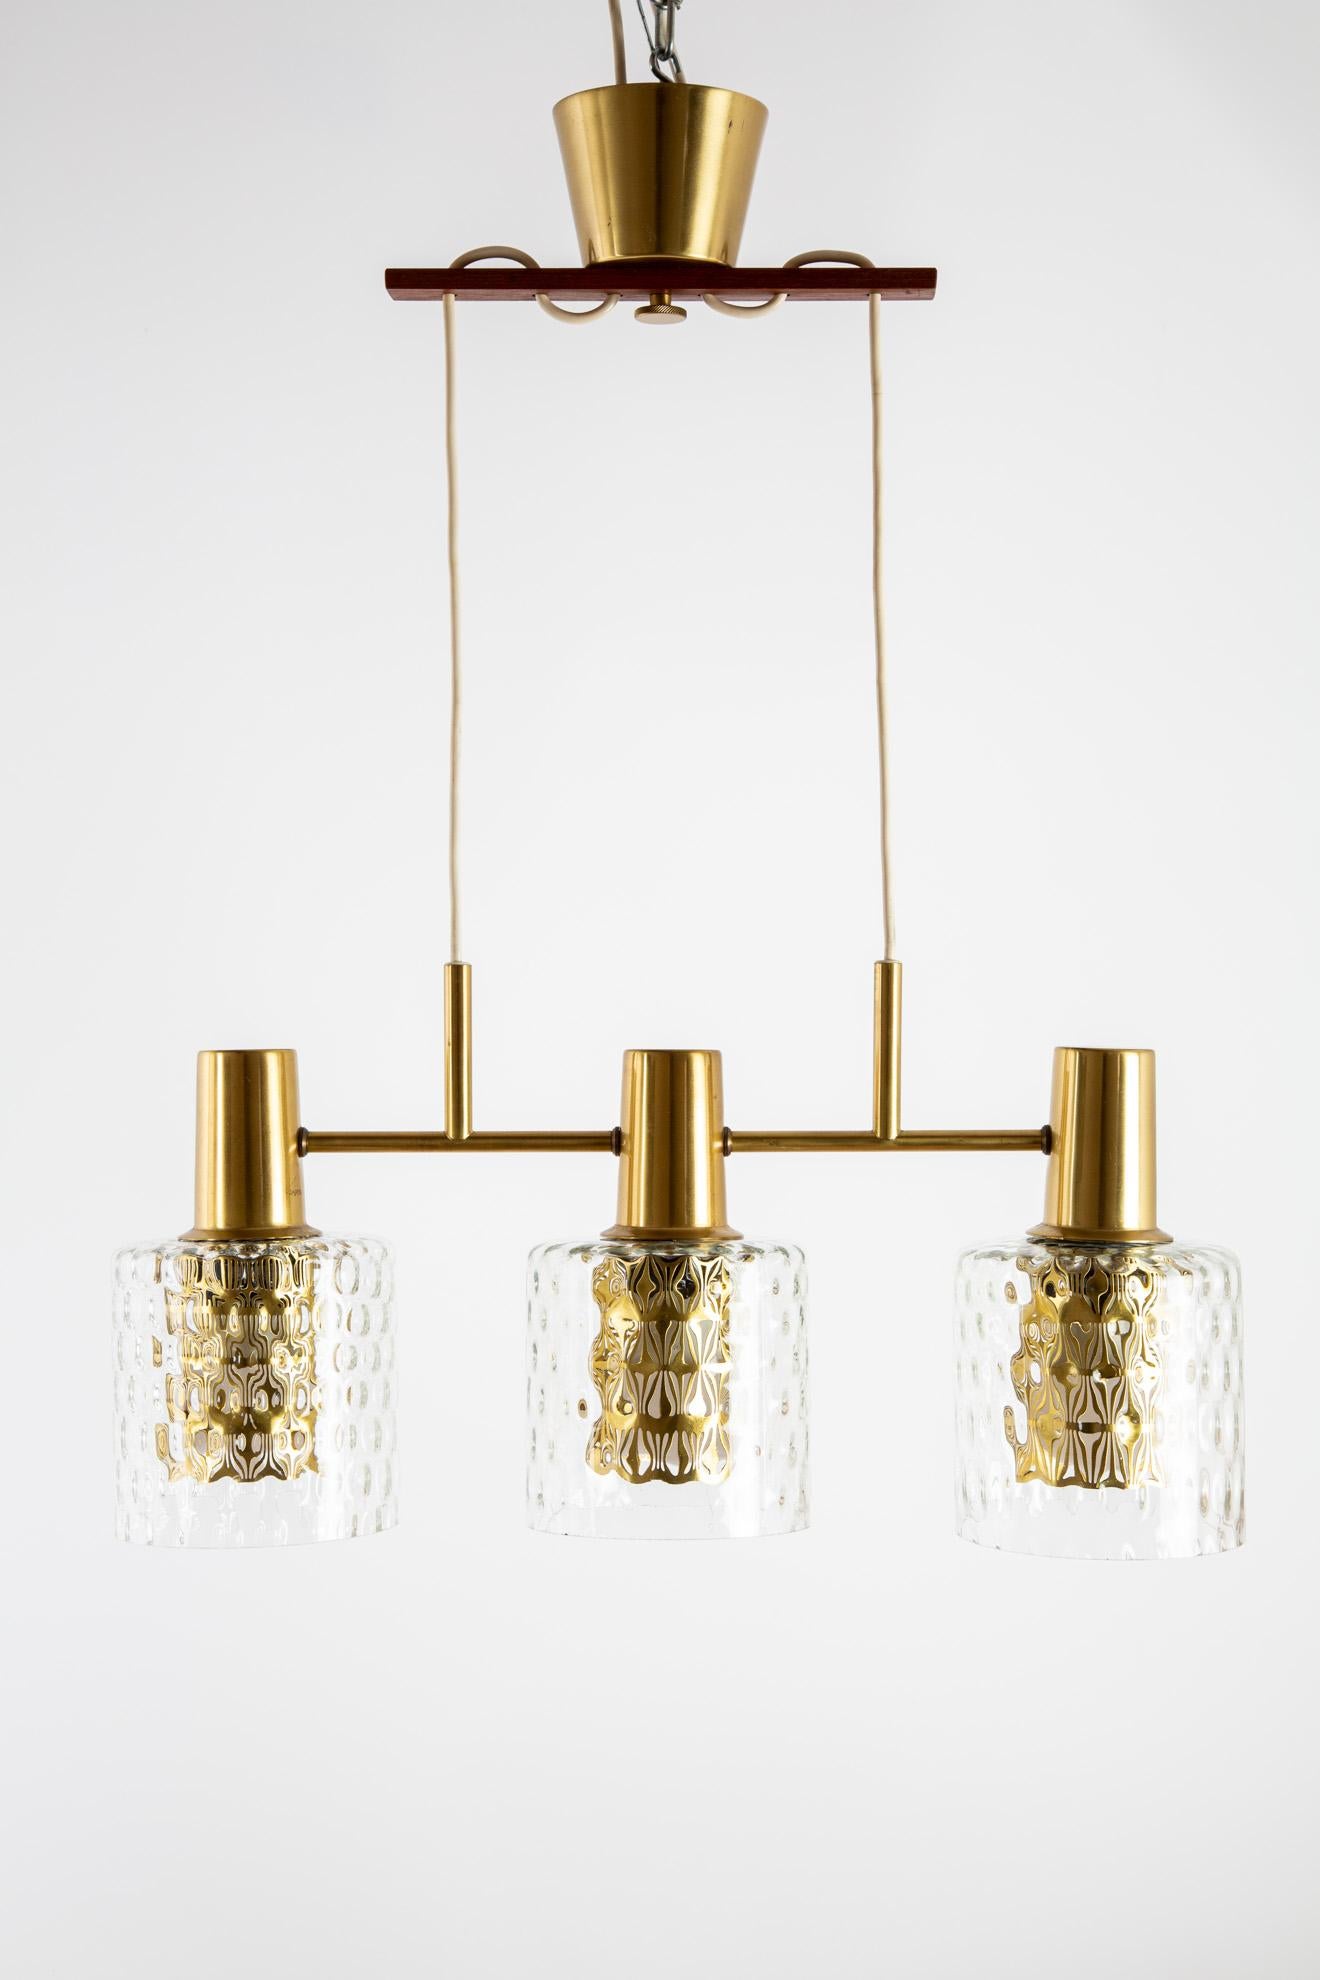 Hans Agne Jakobsson. A Scandinavian Modern pendant lamp. The frame system is of brass. The shades are of bubbled glass. Total width is 52 cm and height is 23 cm. Inclusive a brass ceiling piece.